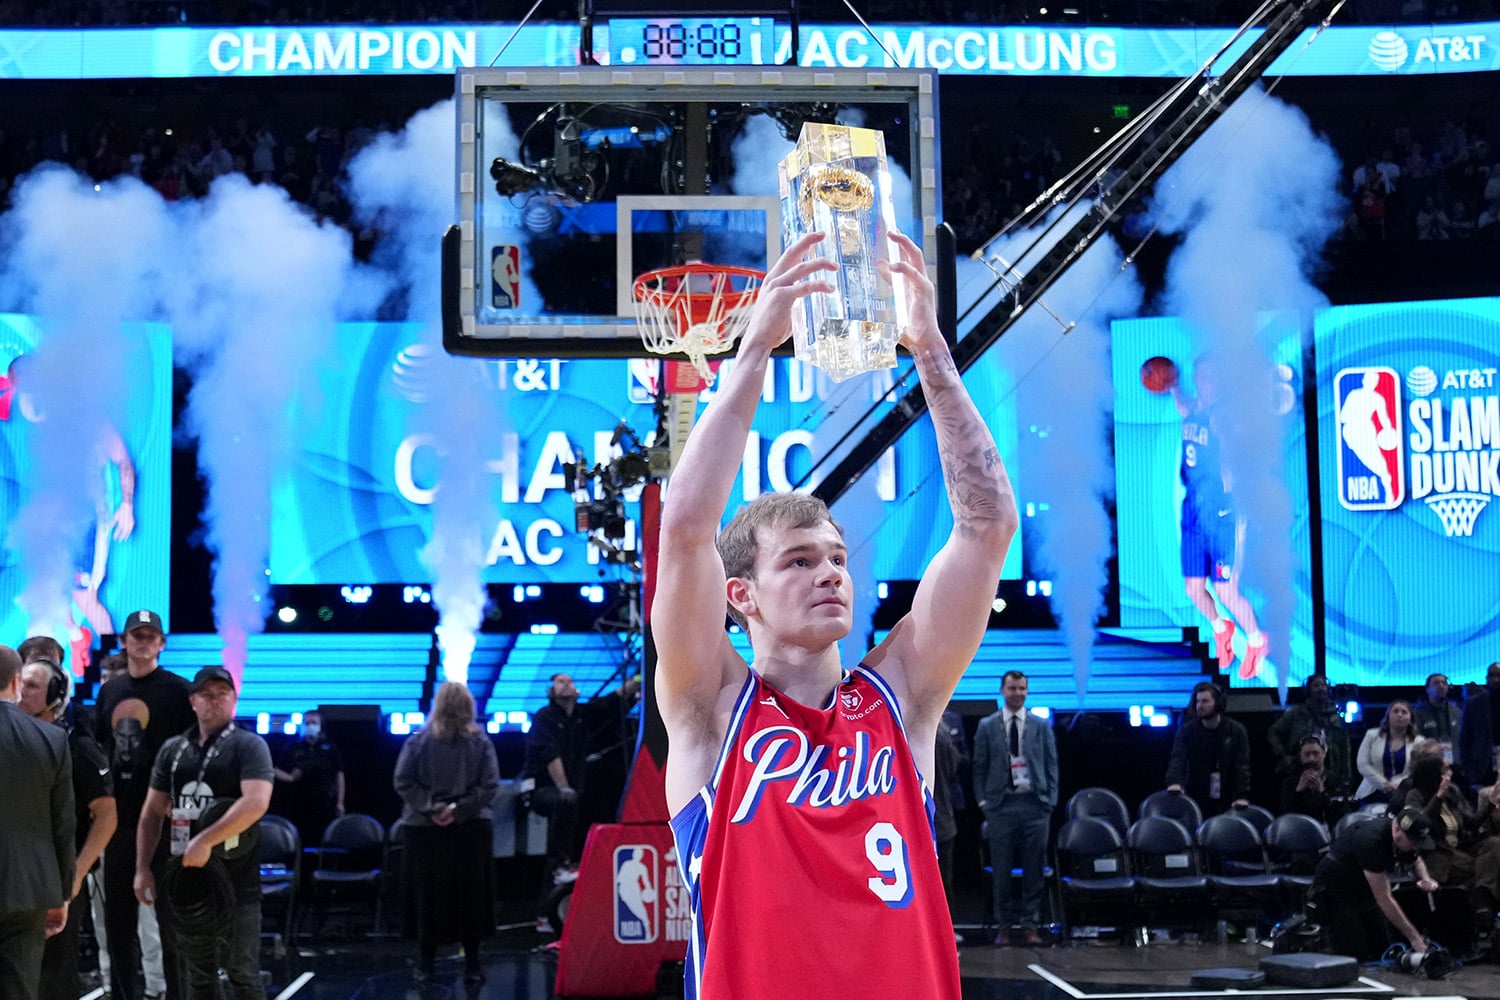 Philadelphia 76ers guard Mac McClung celebrates with the trophy after winning the Dunk Contest during the 2023 All Star Saturday Night